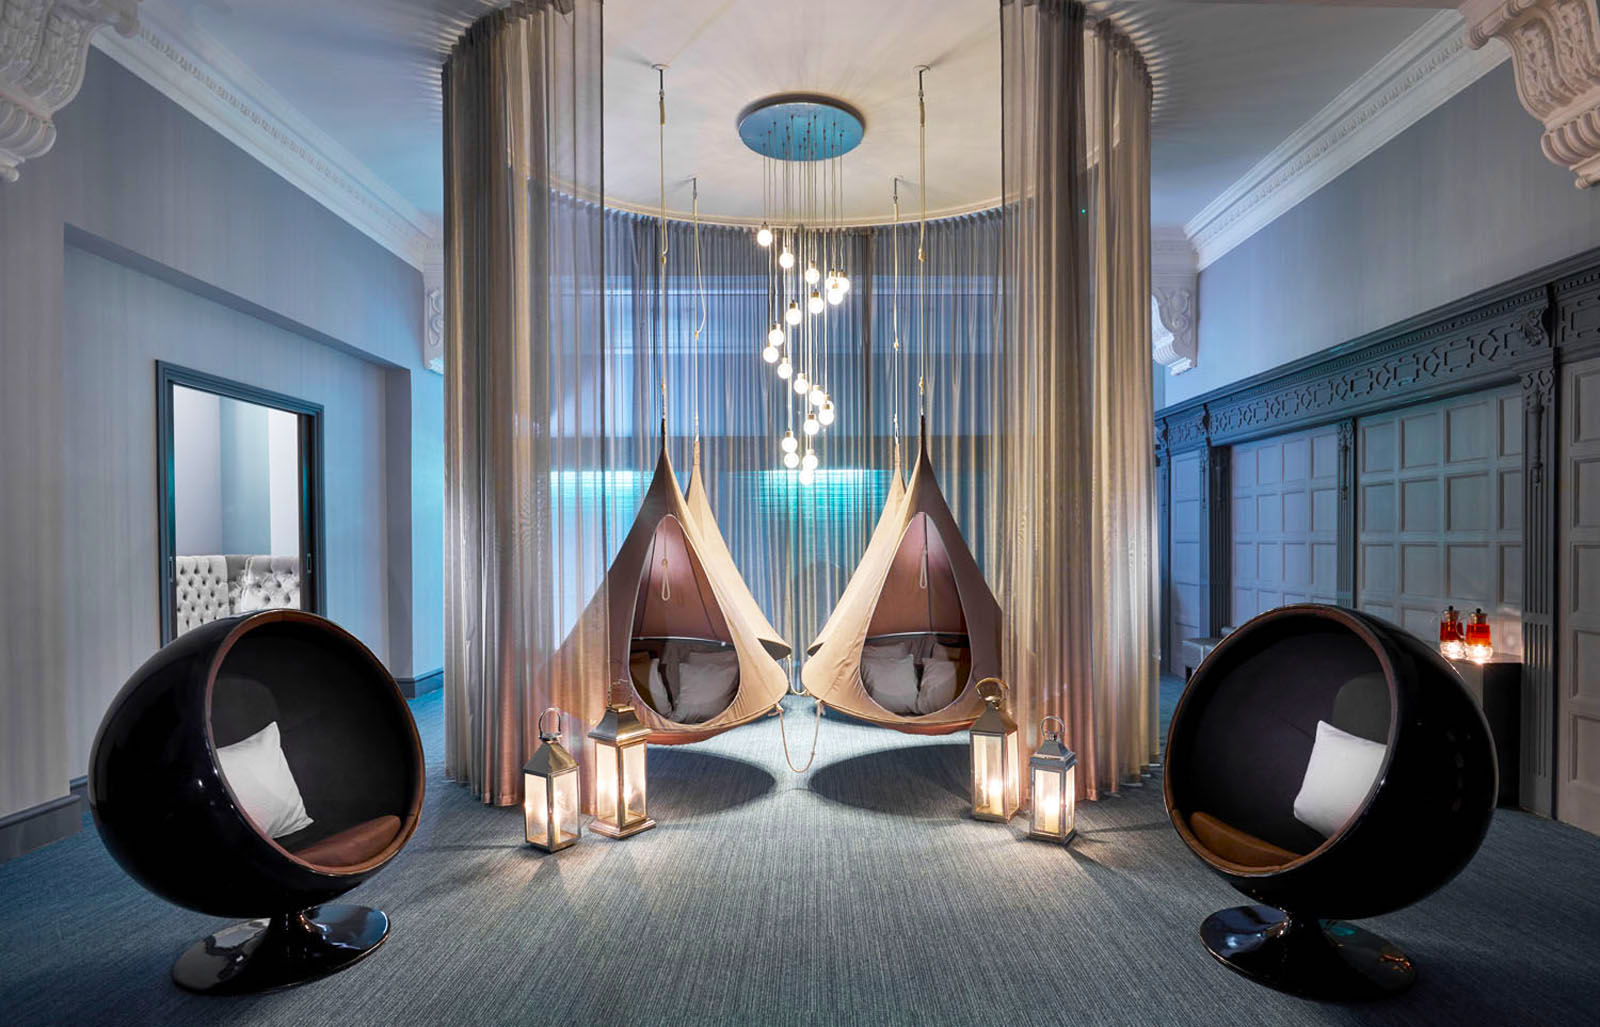 Afternoon Time Spa Day , Rena Spa At The Midland Hotel